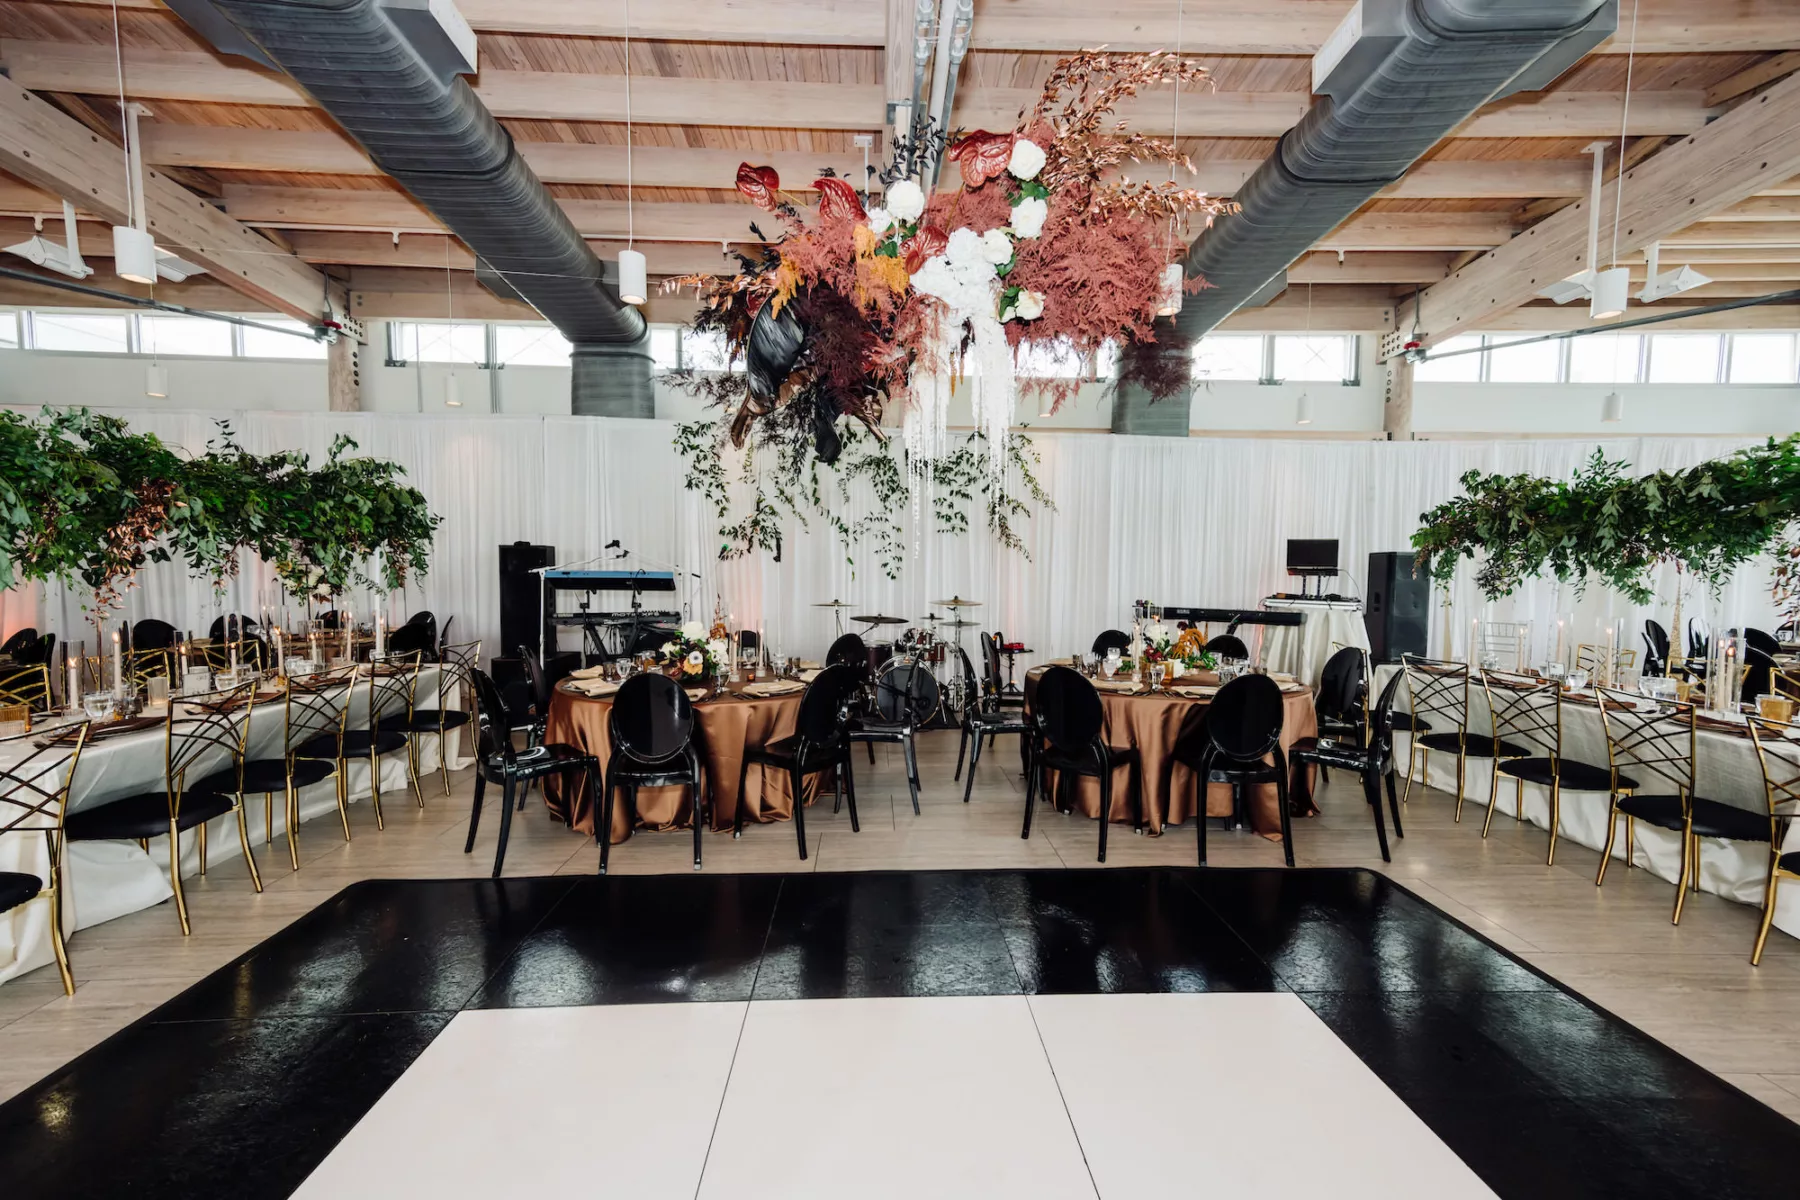 Modern Black and Bronze Wedding Reception Decor Inspiration | Black and White Dance Floor Ideas | Whimsical Fall Floral Chandelier with White Roses, Orange Leaves, Anthurium, and Orange Wisteria Decor | Tampa Bay Rentals A Chair Affair | Venue Tampa River Center